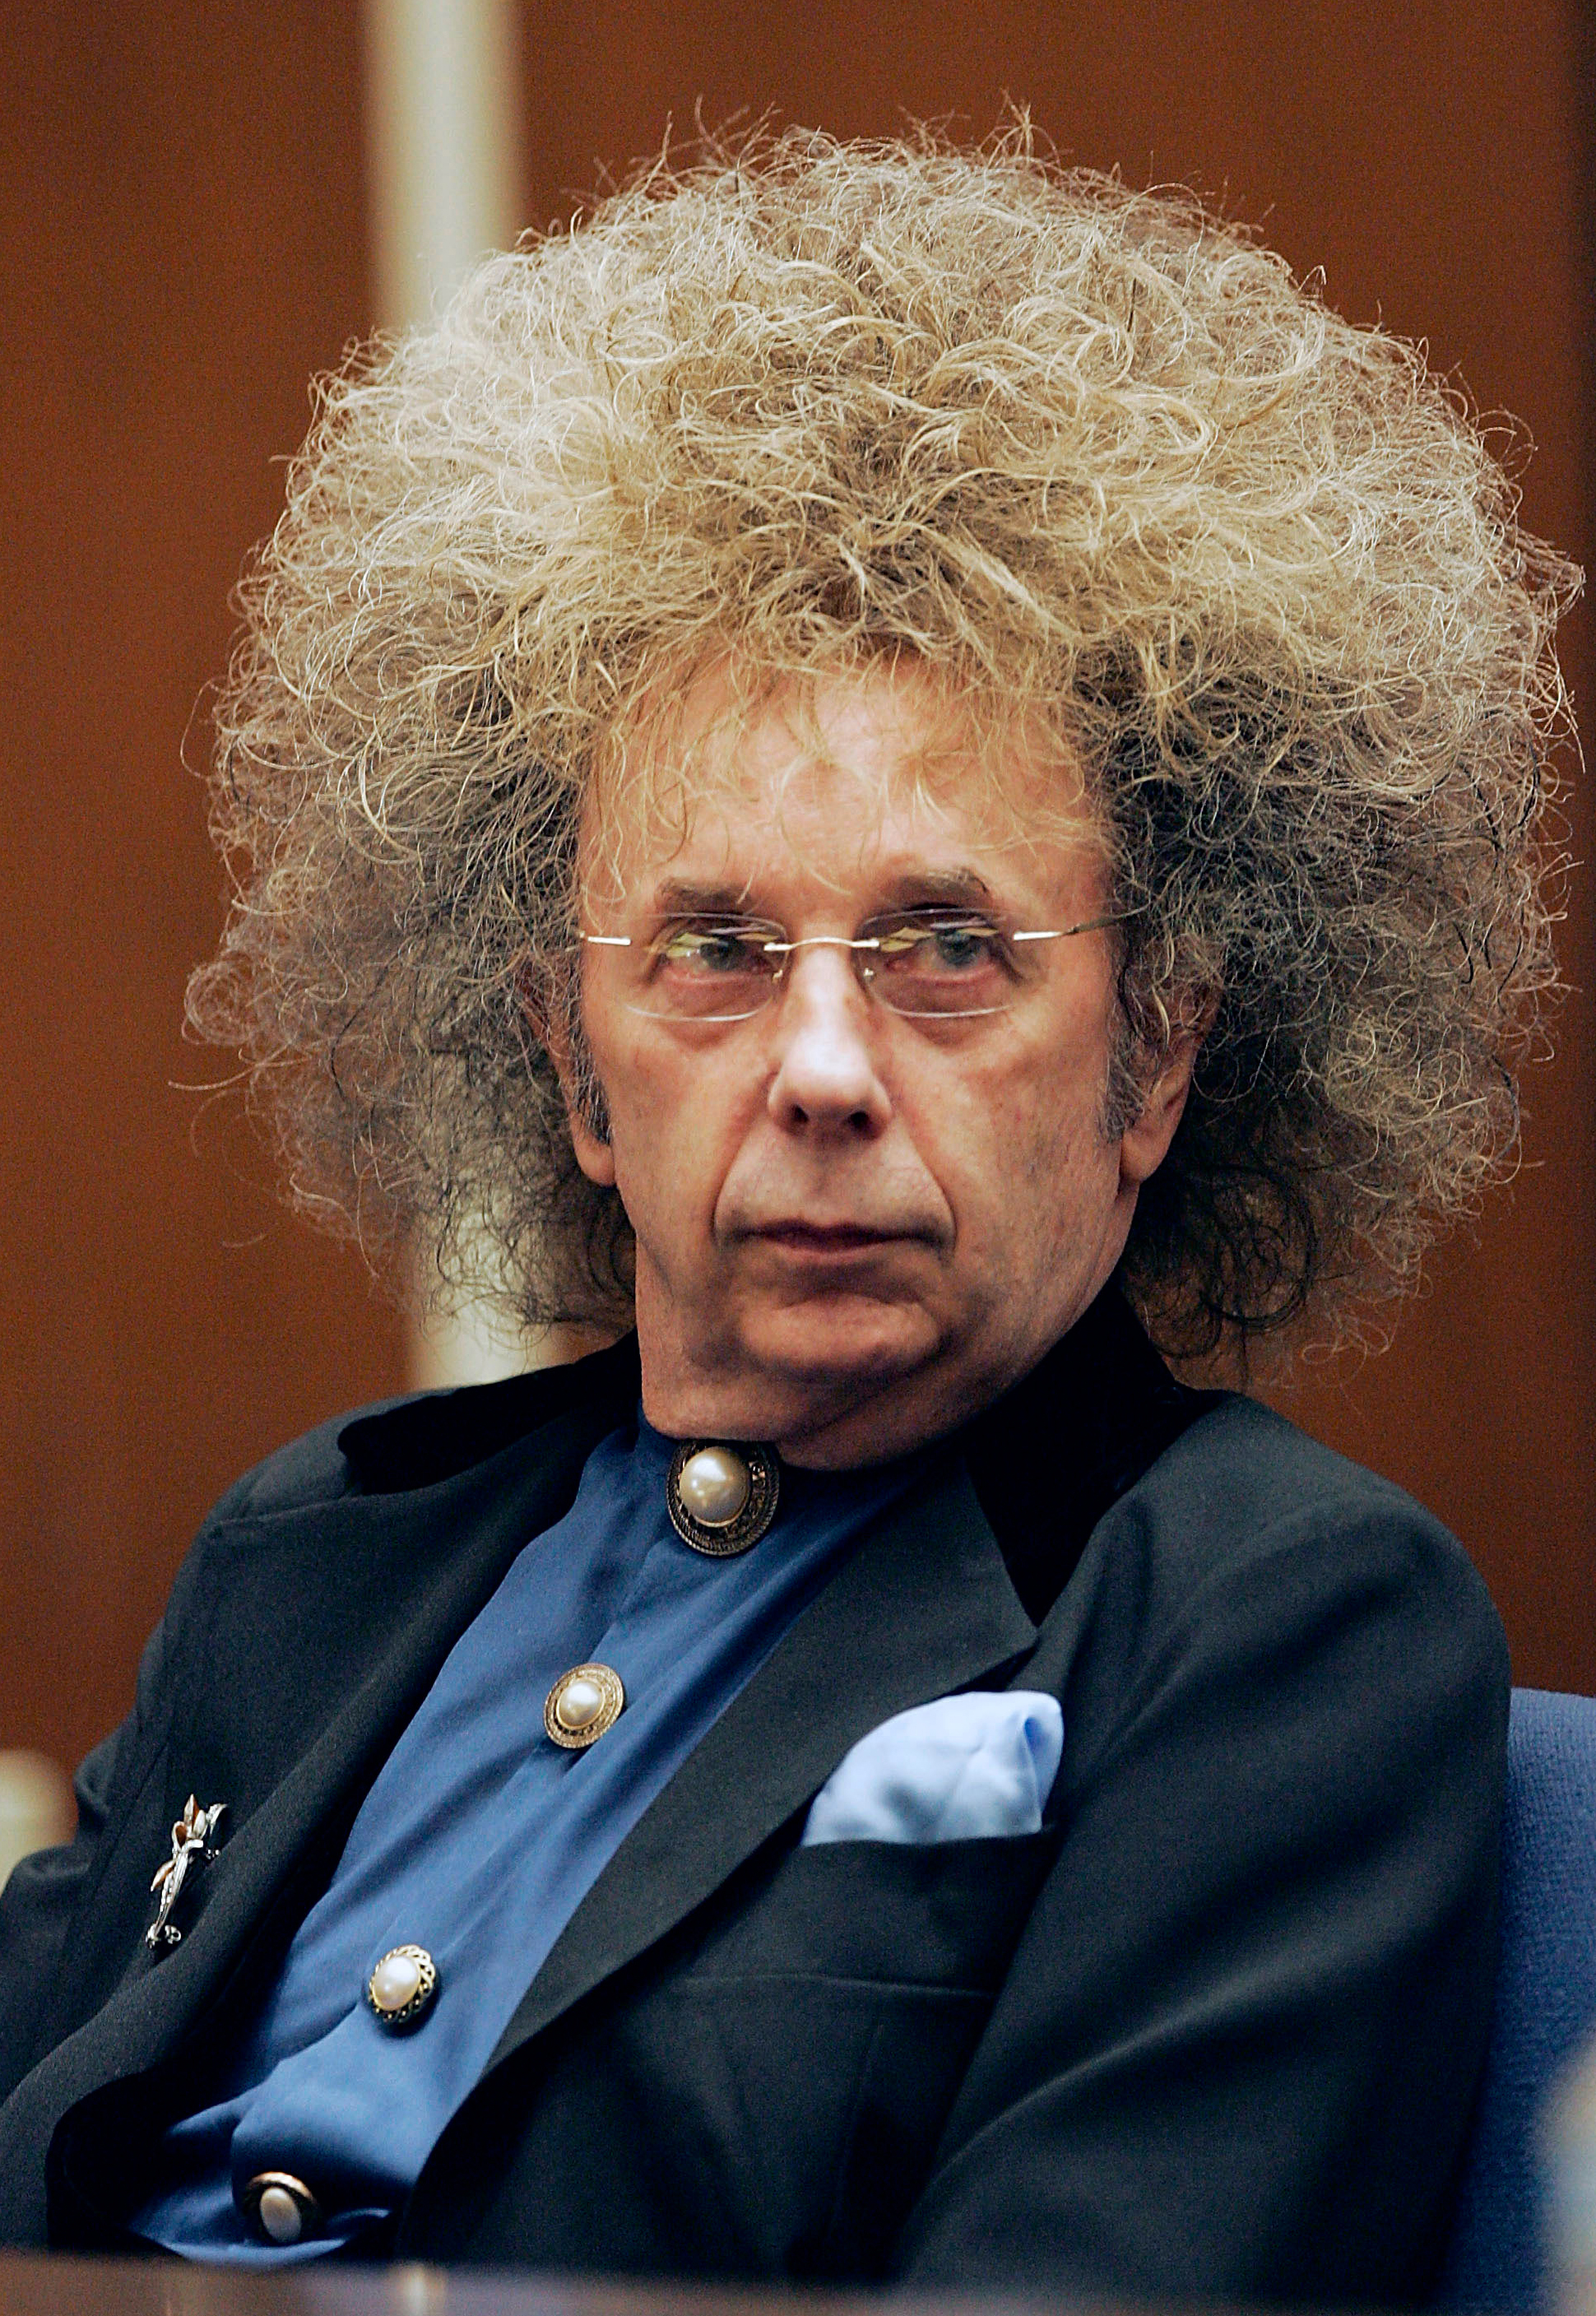 <p>Legendary "Wall of Sound" music producer Phil Spector died at 81 on Jan. 16 while incarcerated for the 2003 murder of Lana Clarkson. According to a statement from the California Department of Corrections and Rehabilitation, he was "pronounced deceased of natural causes ... at an outside hospital." <a href="https://www.tmz.com/2021/01/17/phil-spector-dead-dies-81/">TMZ</a>, however, reported that the man who honed some of the most well-known songs of the '60s and '70s -- including The Righteous Brothers' "You Lost that Lovin' Feeling" and "Unchained Melody," The Ronettes' "Be My Baby," The Beatles' "Let It Be" album and John Lennon's "Imagine" -- had been hospitalized with COVID-19 four weeks earlier and returned to prison after beginning to recover. He then, TMZ reported, was sent back to the hospital after suffering breathing issues and soon died. </p>